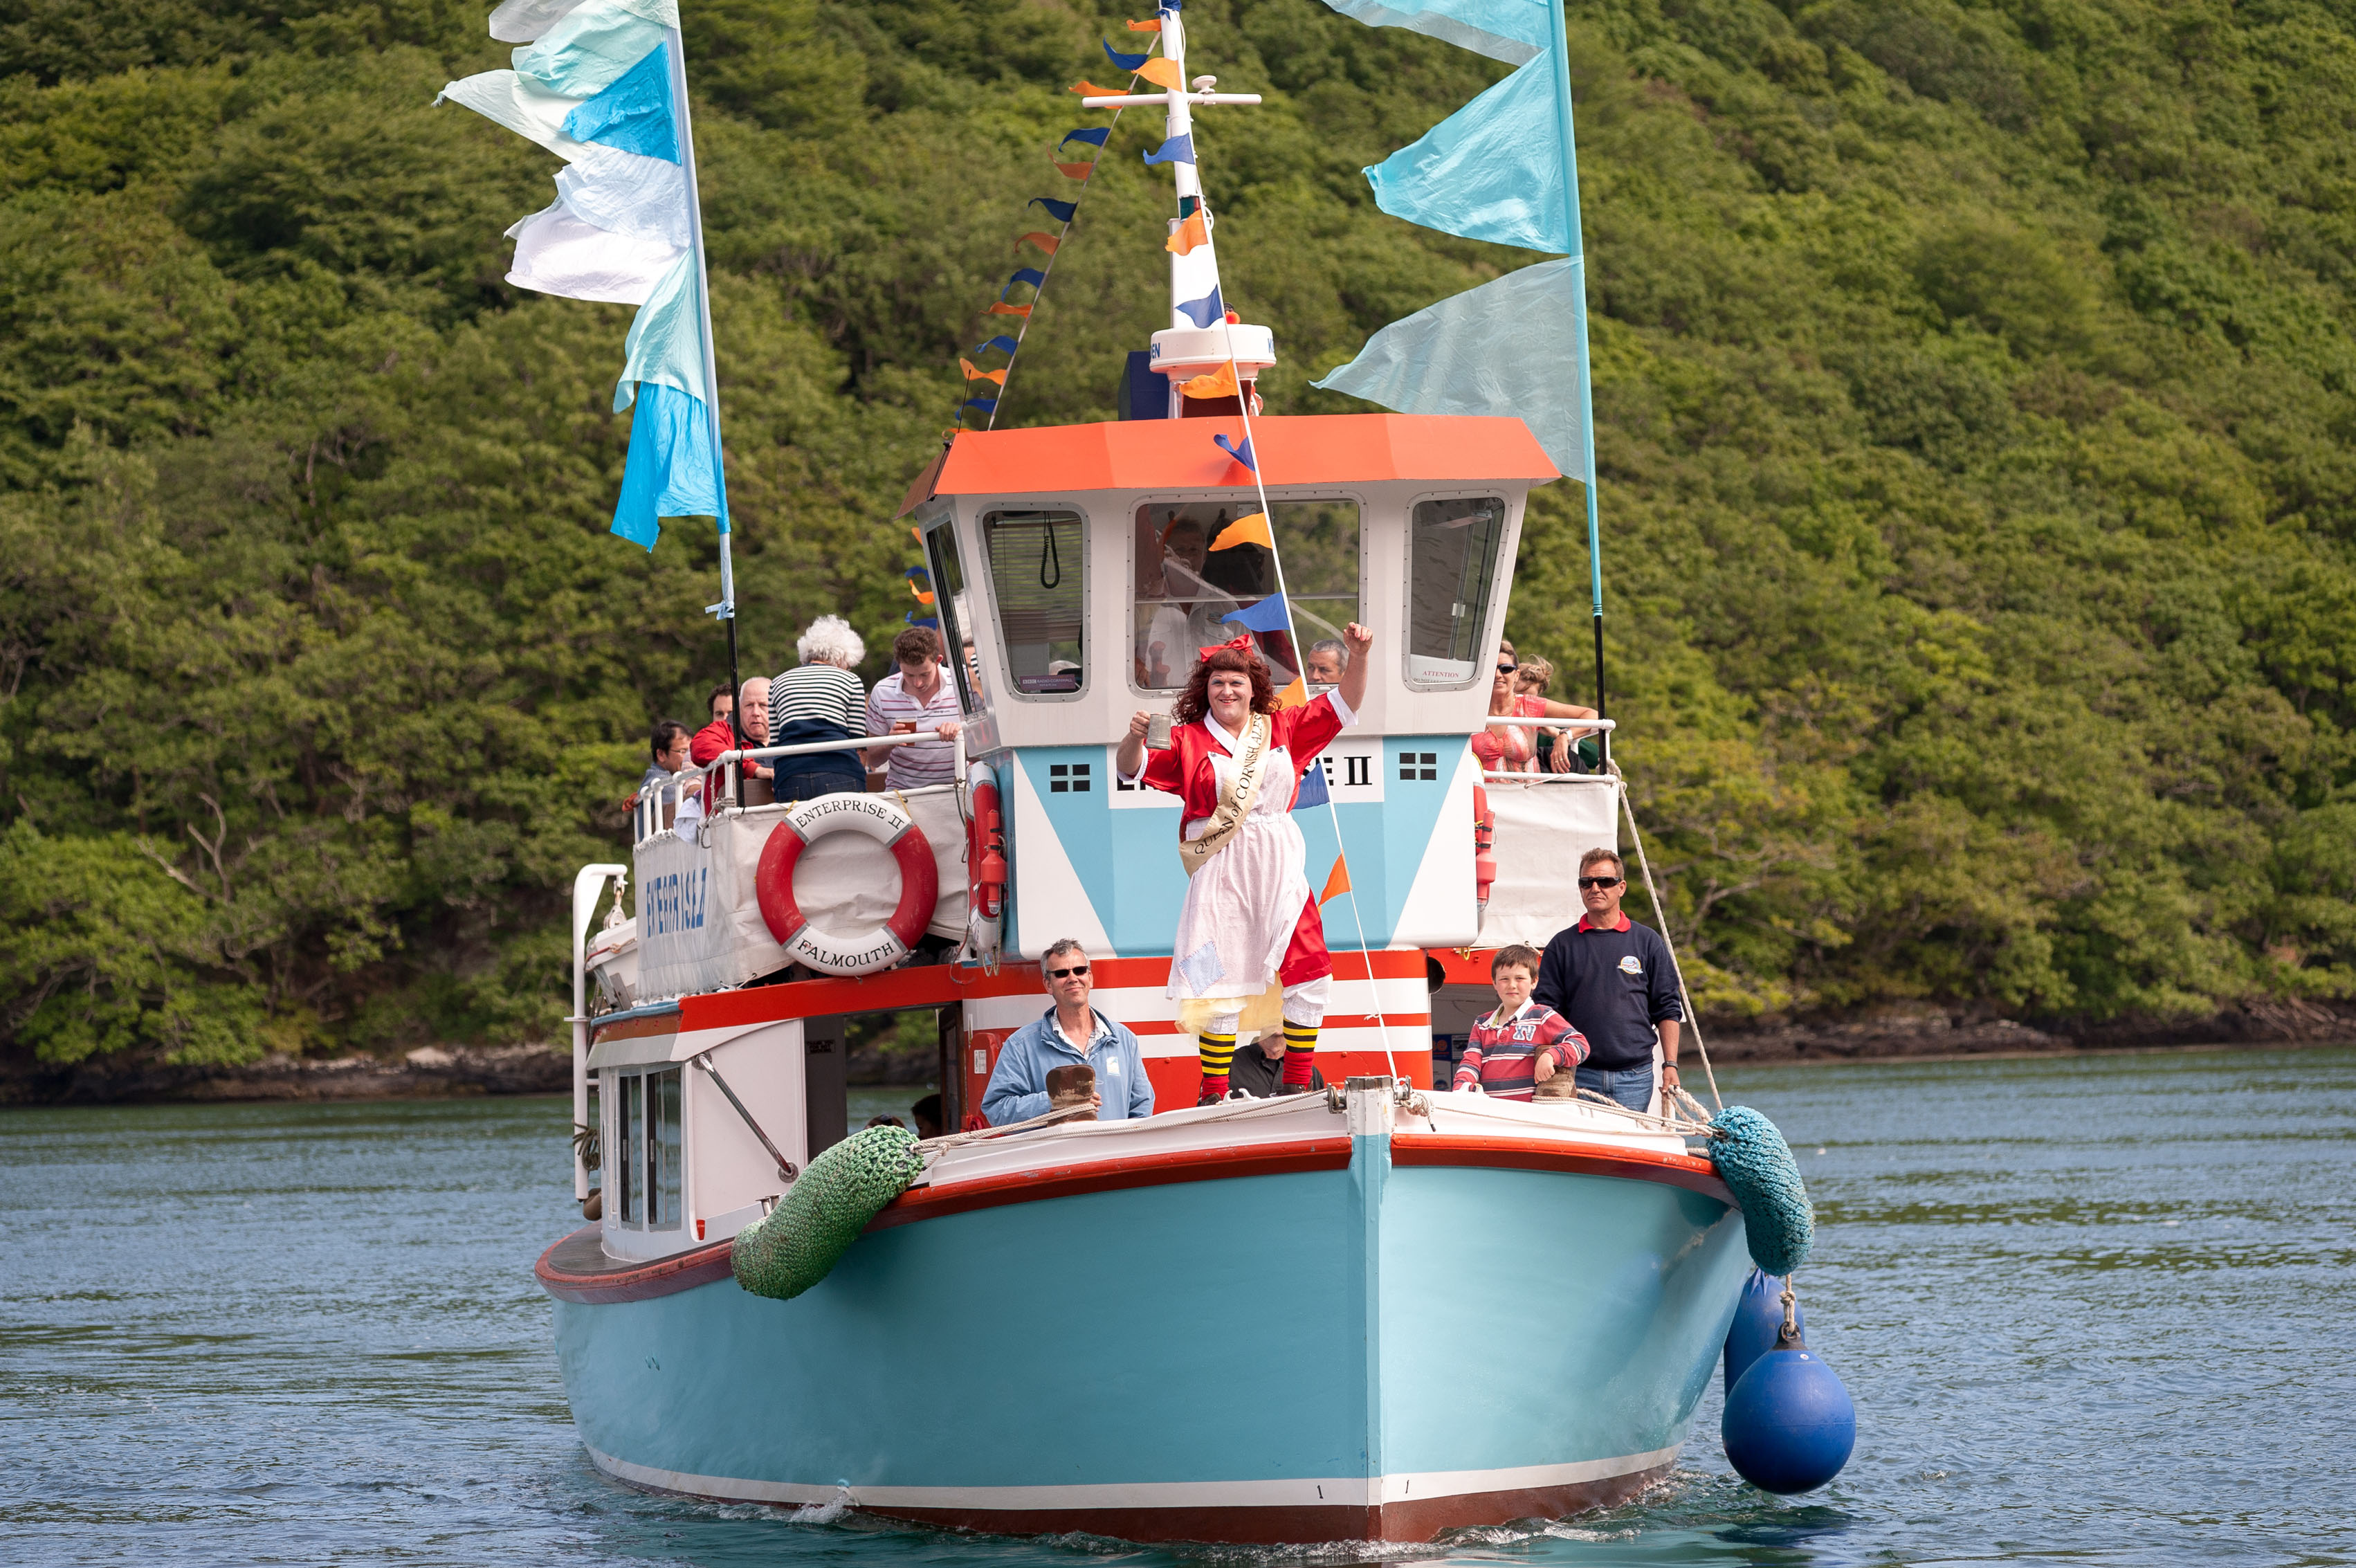 The Fal River Festival is now one of the largest events in Cornwall